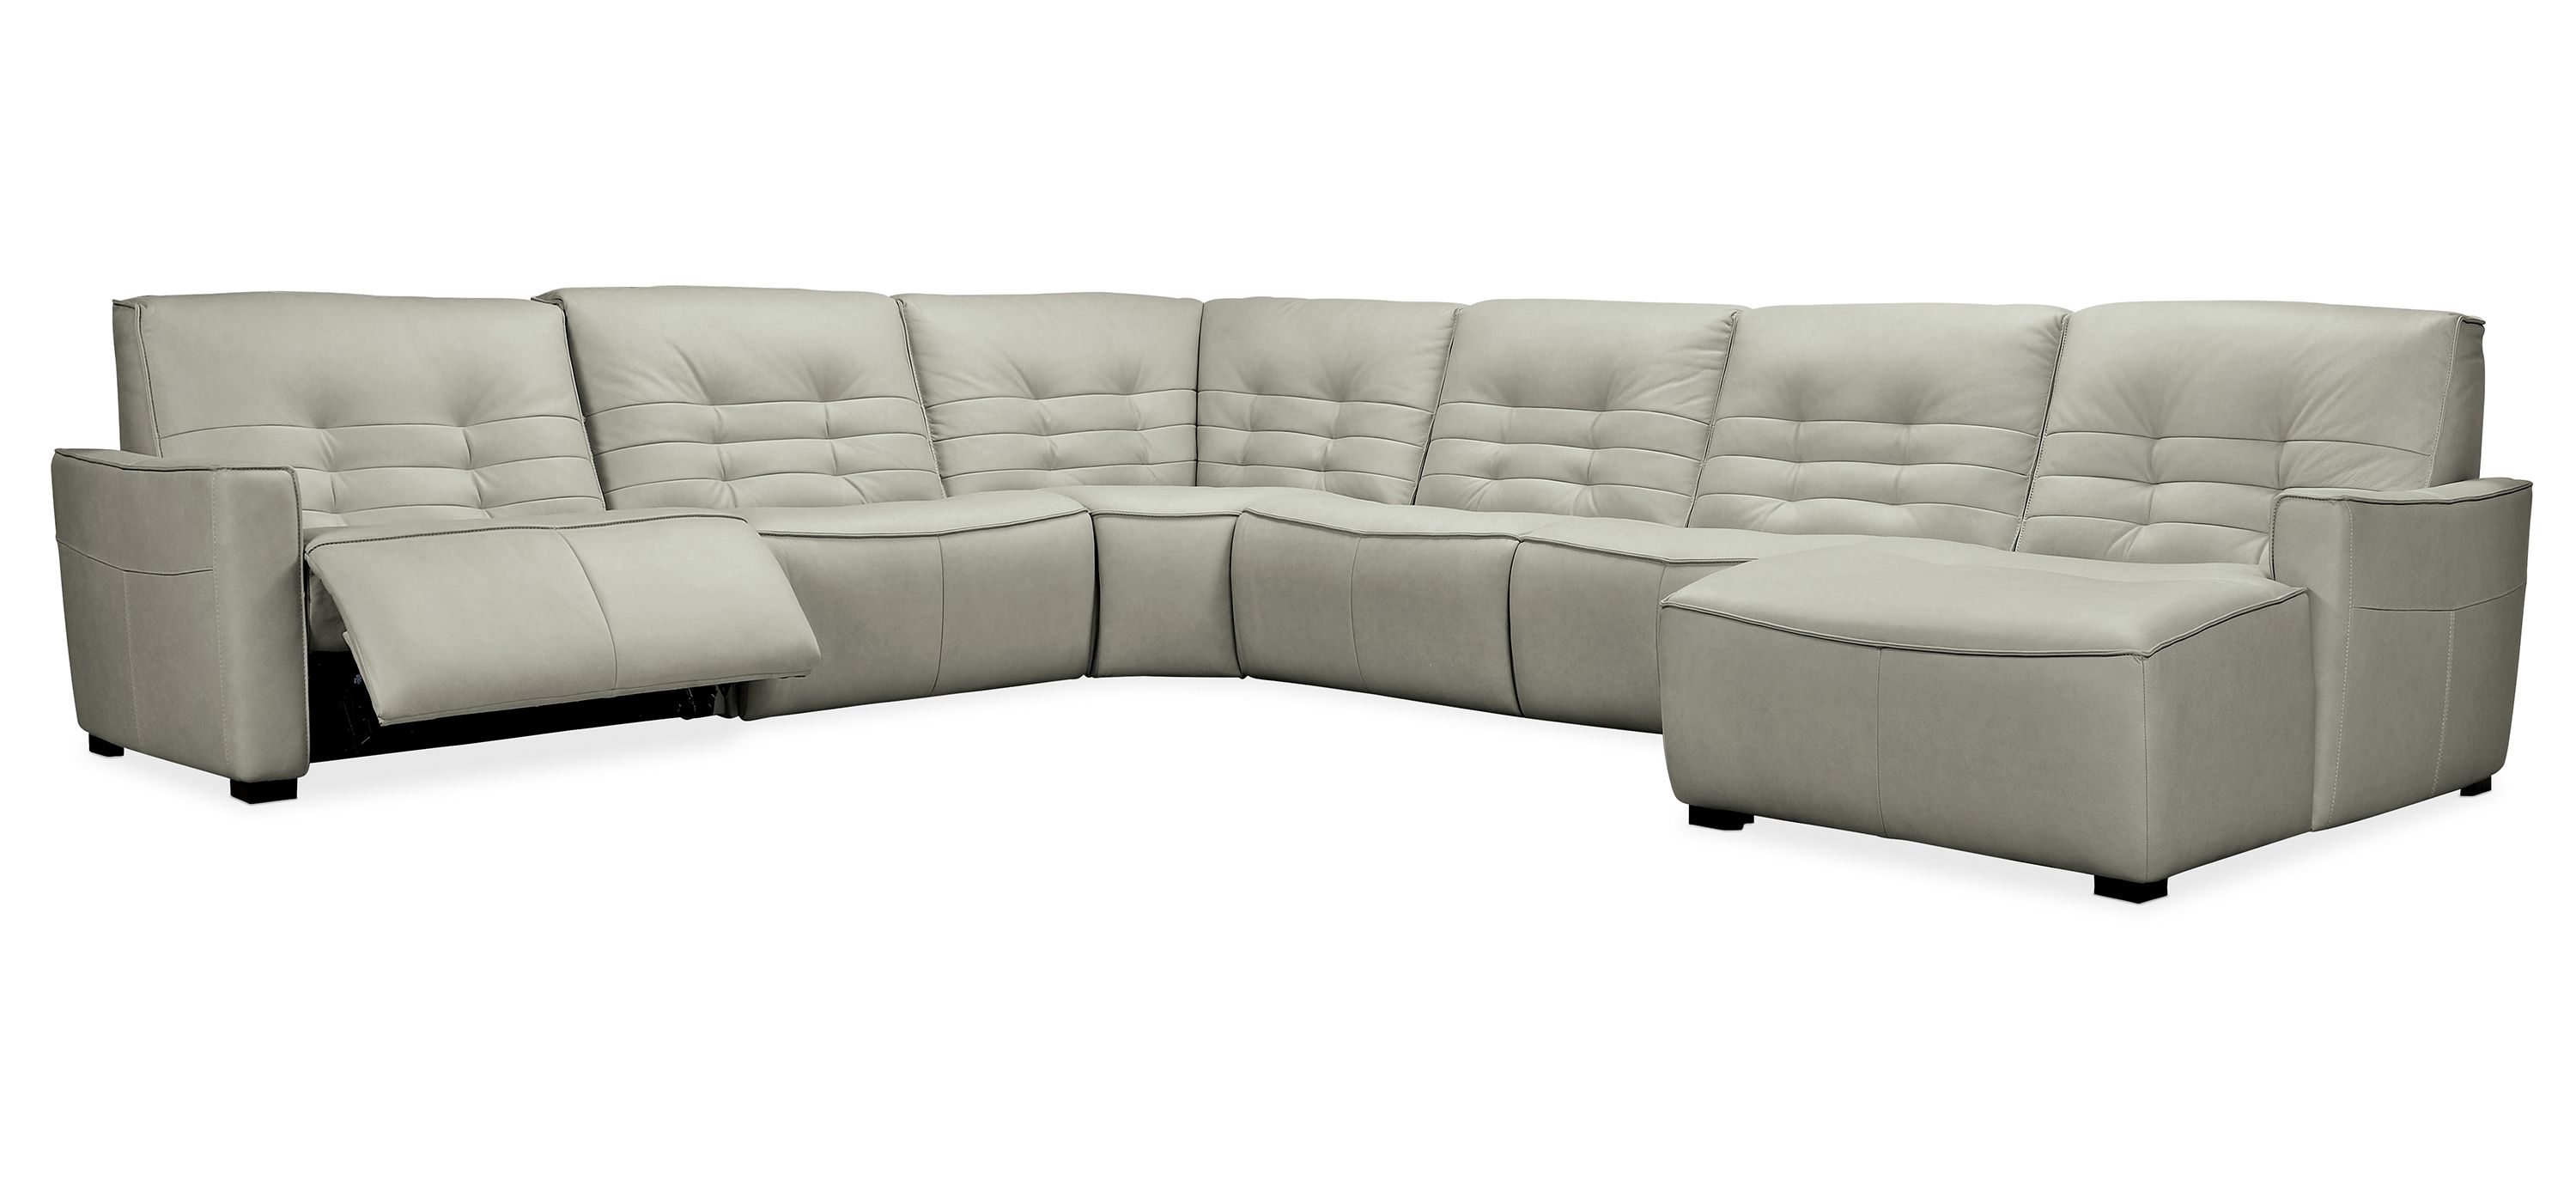 Reaux Power Reclining Sectional w/ Chaise